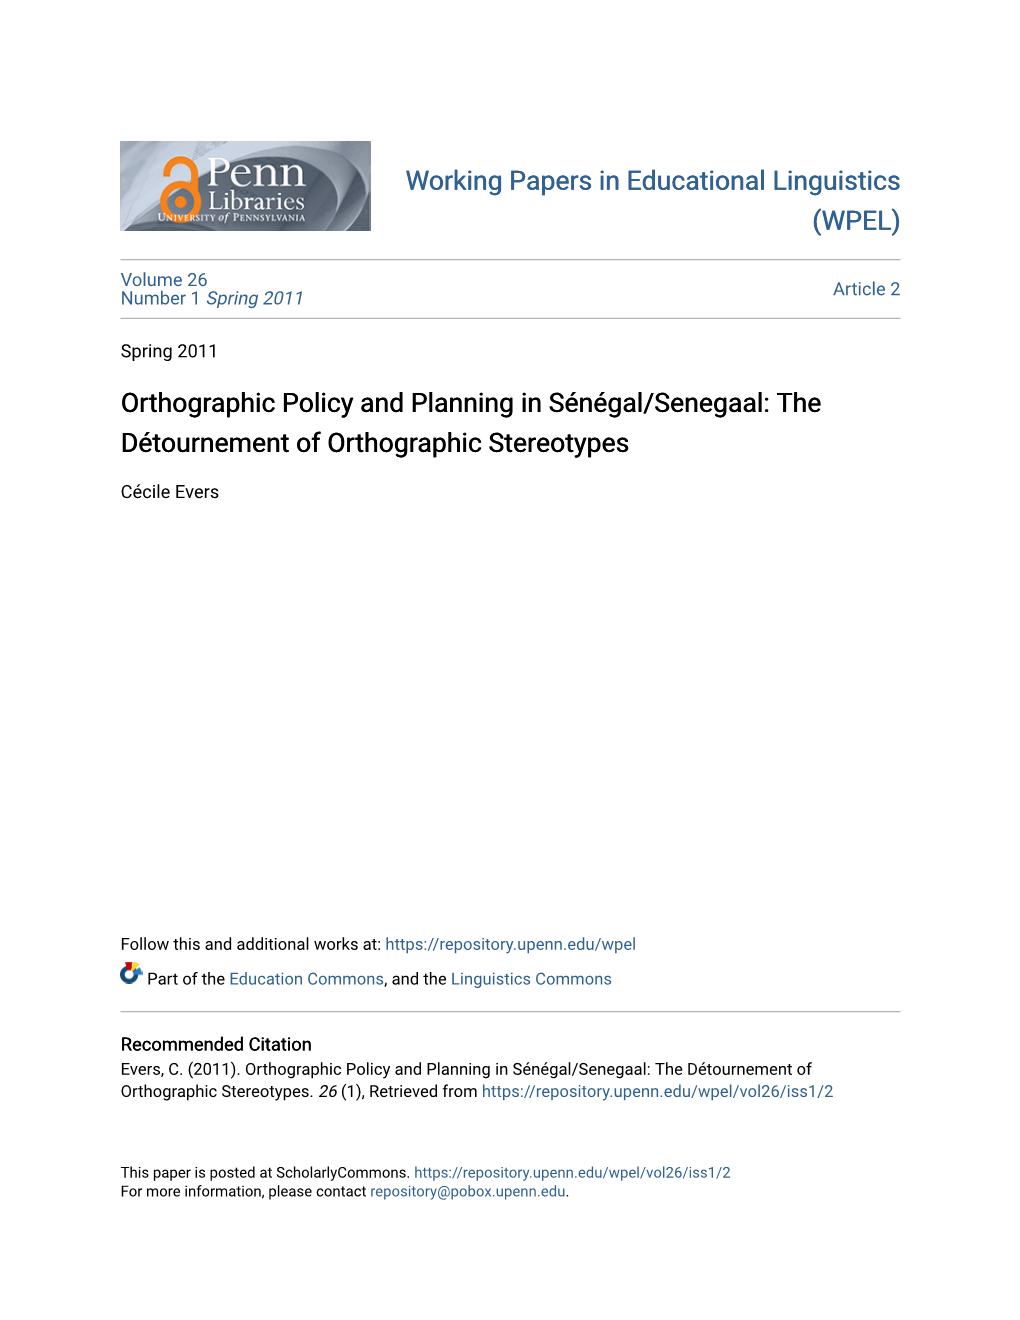 Orthographic Policy and Planning in Sénégal/Senegaal: the Détournement of Orthographic Stereotypes